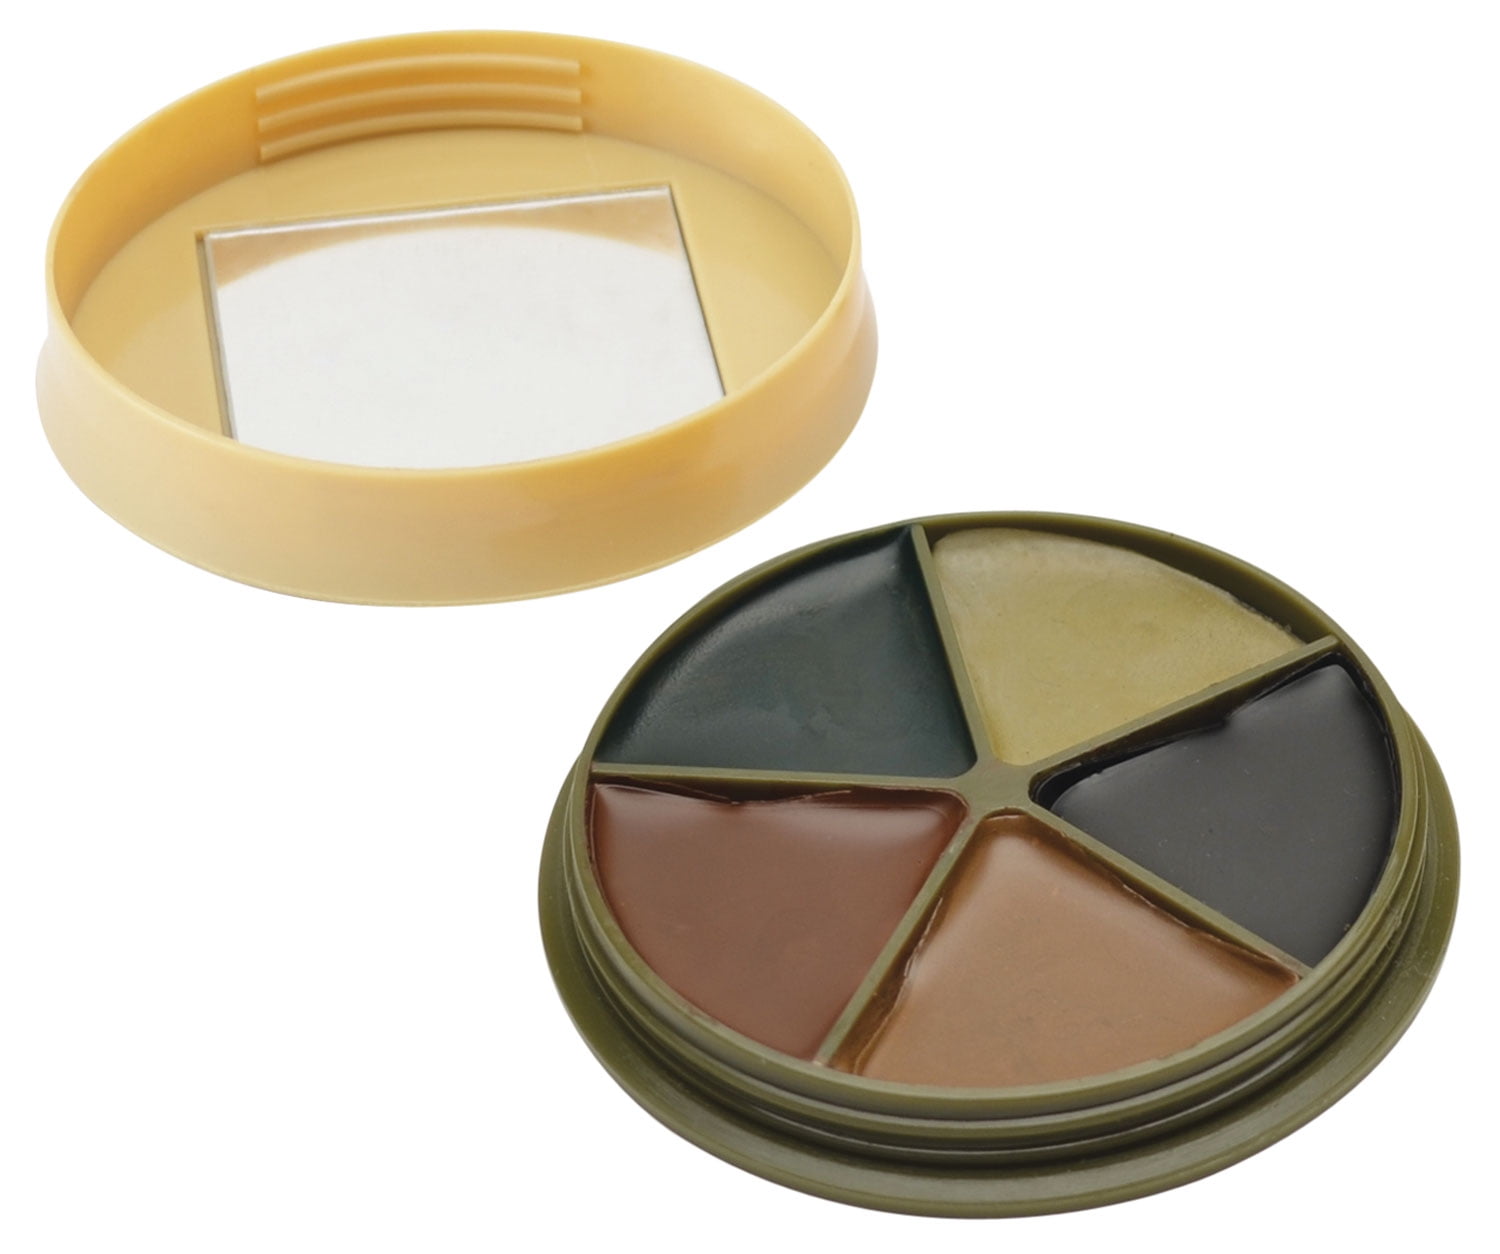 Hunters Specialties 5 Color Military Forest Digital Makeup Kit for sale online 